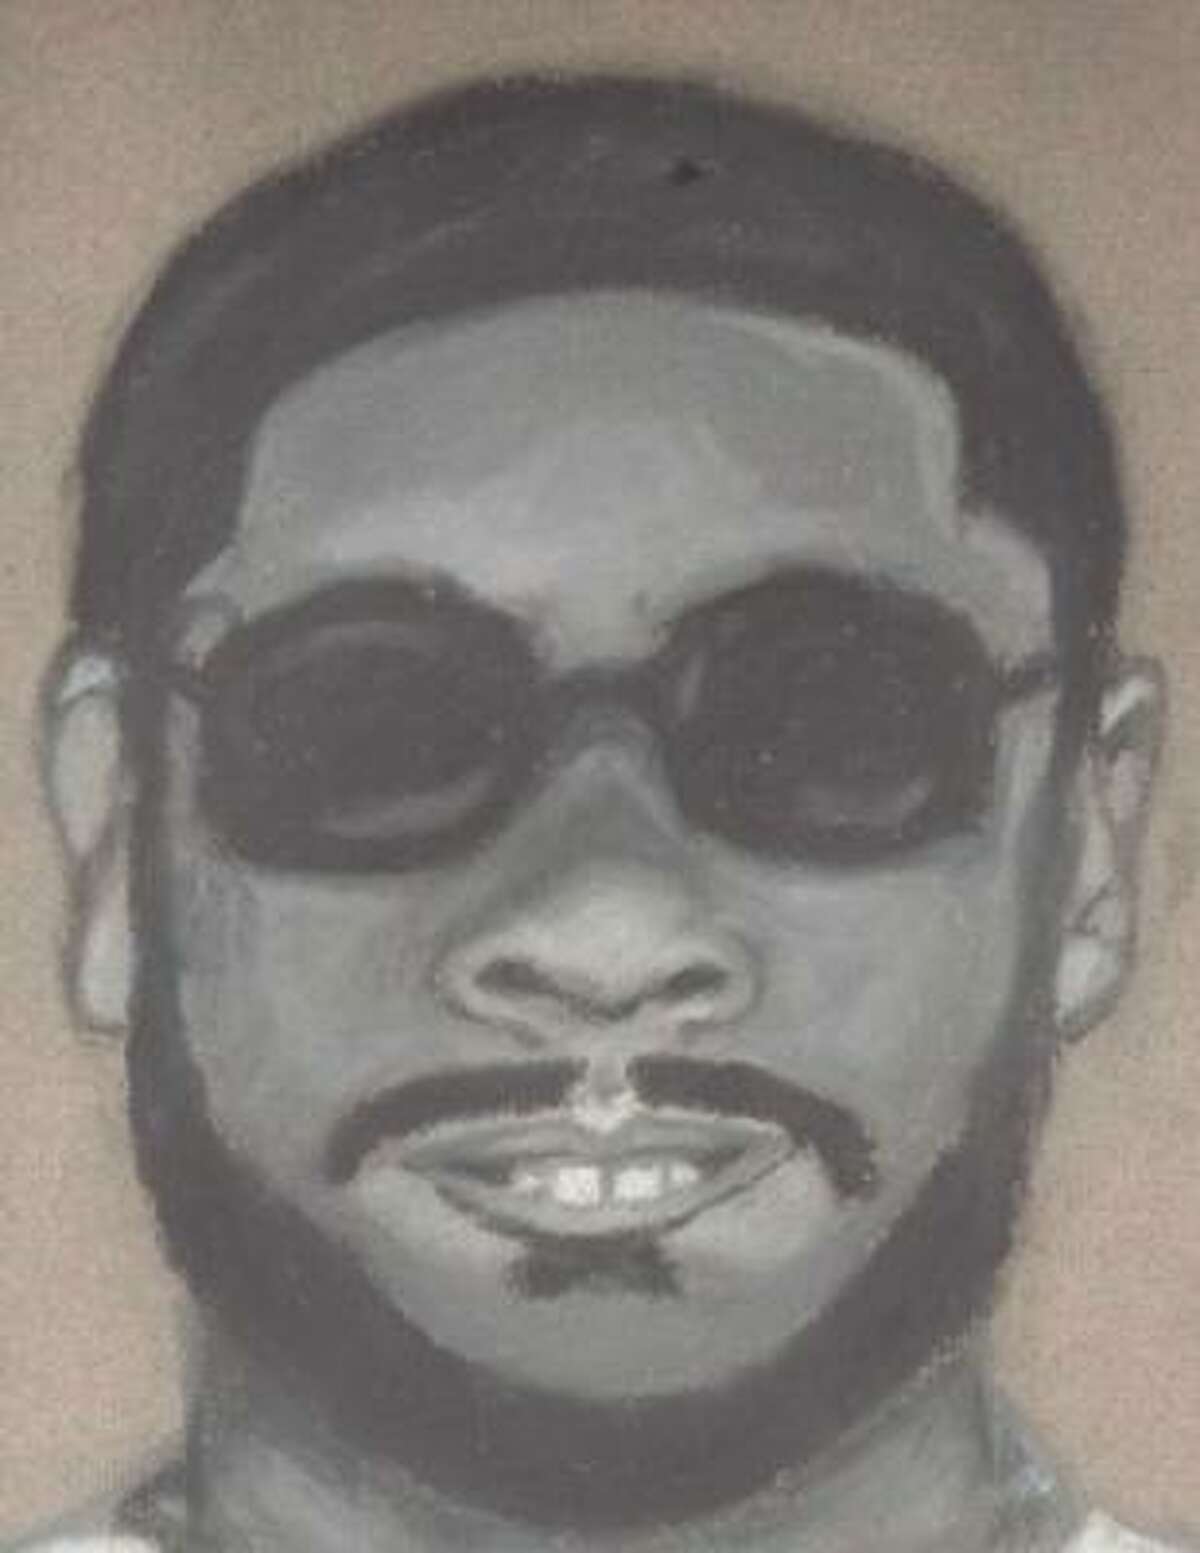 This sketch resembles the suspect in a sexual attack on a young boy in Rachell's neighborhood.